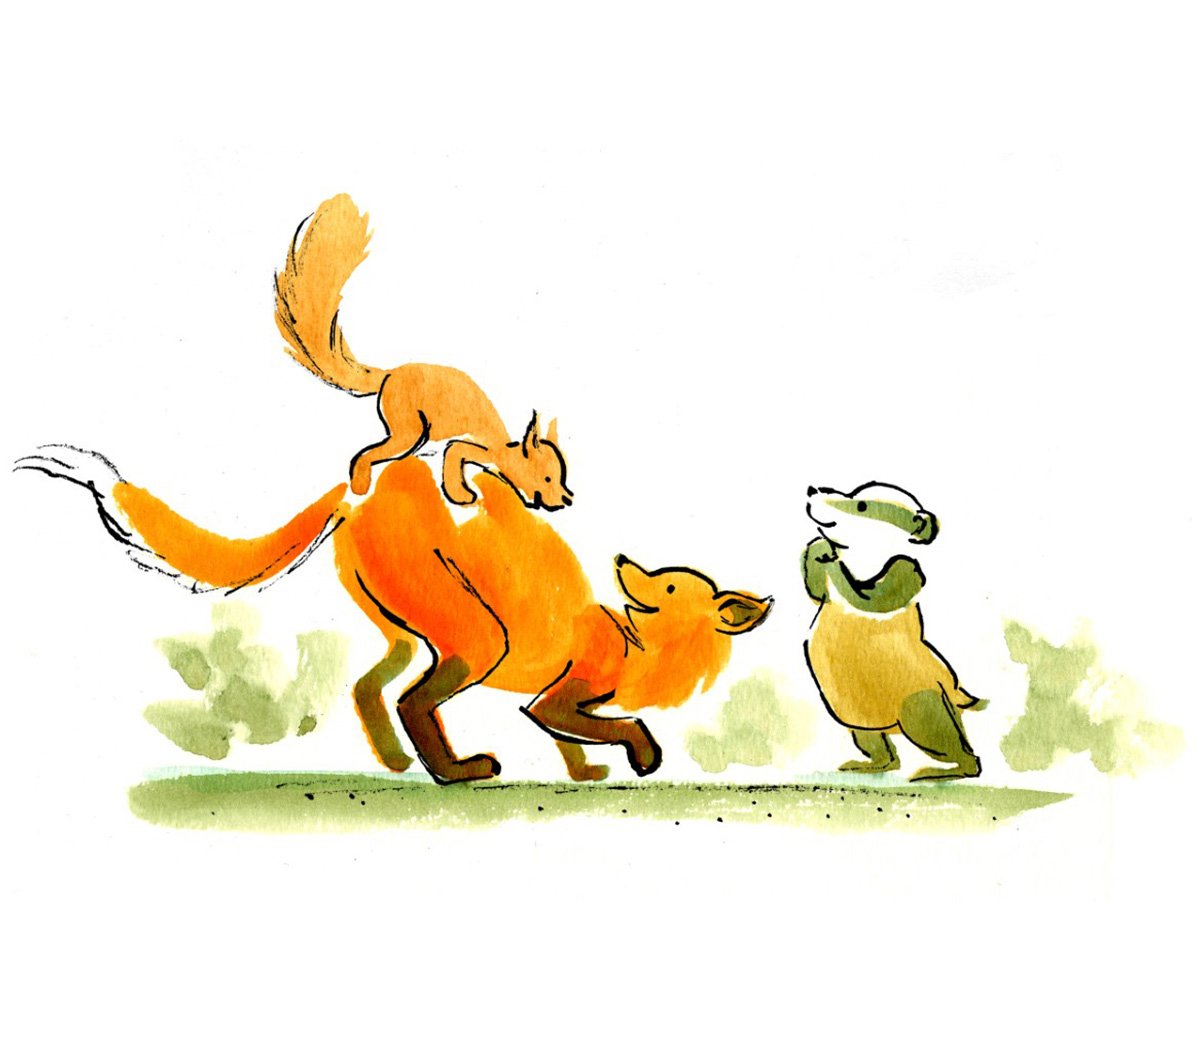 emma-chinnery-fox-squirrel-and-badger-playing-illustration.jpg